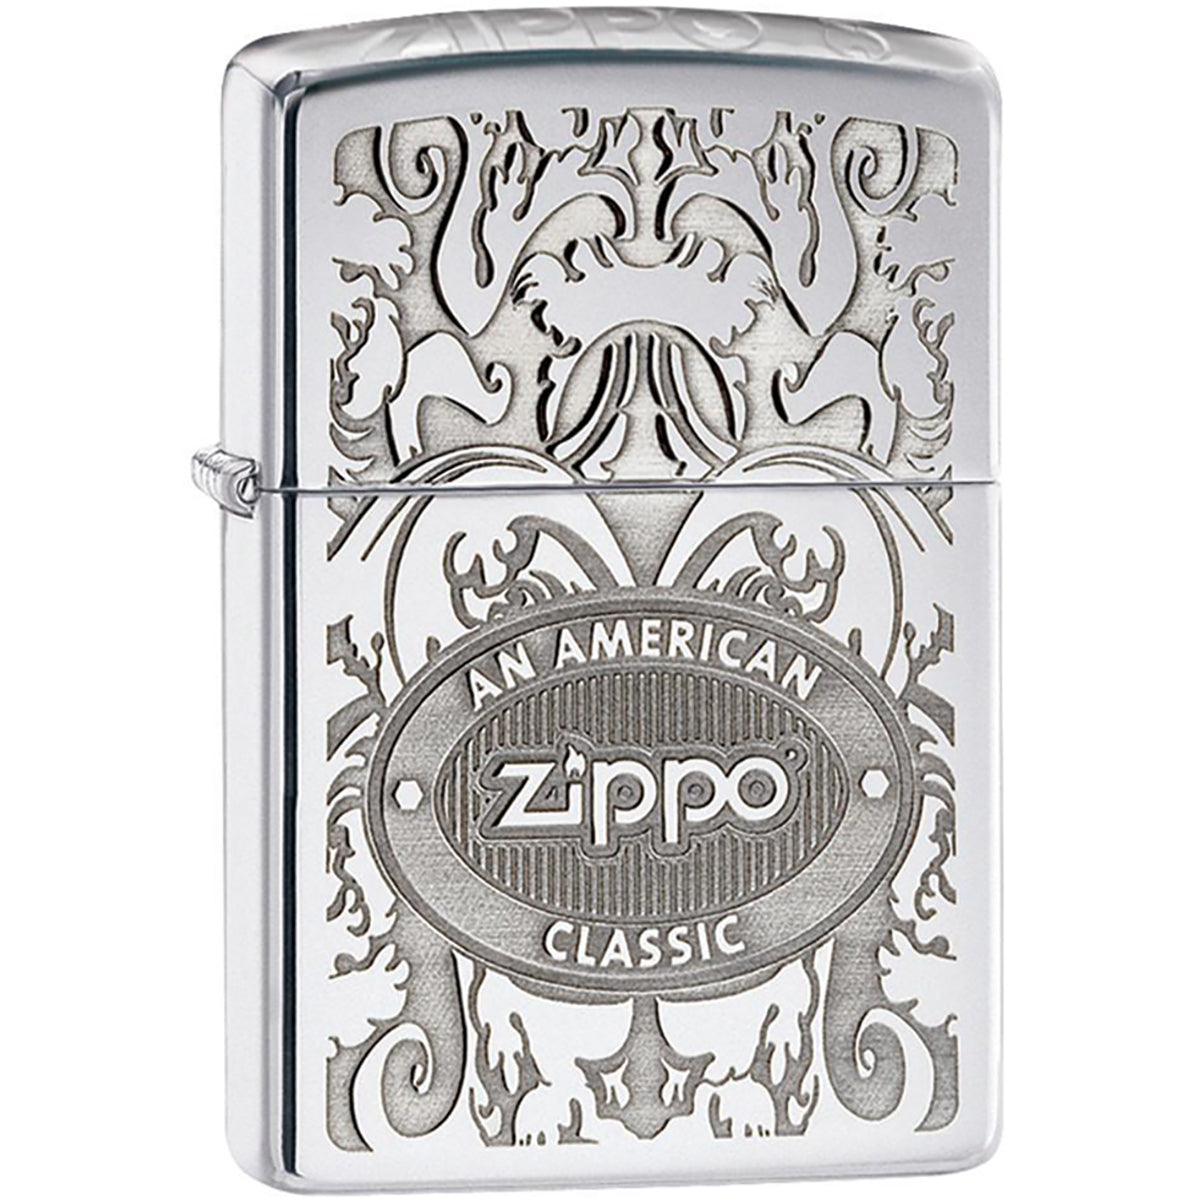 Zippo Crown Stamp with American Classic Pocket Lighter